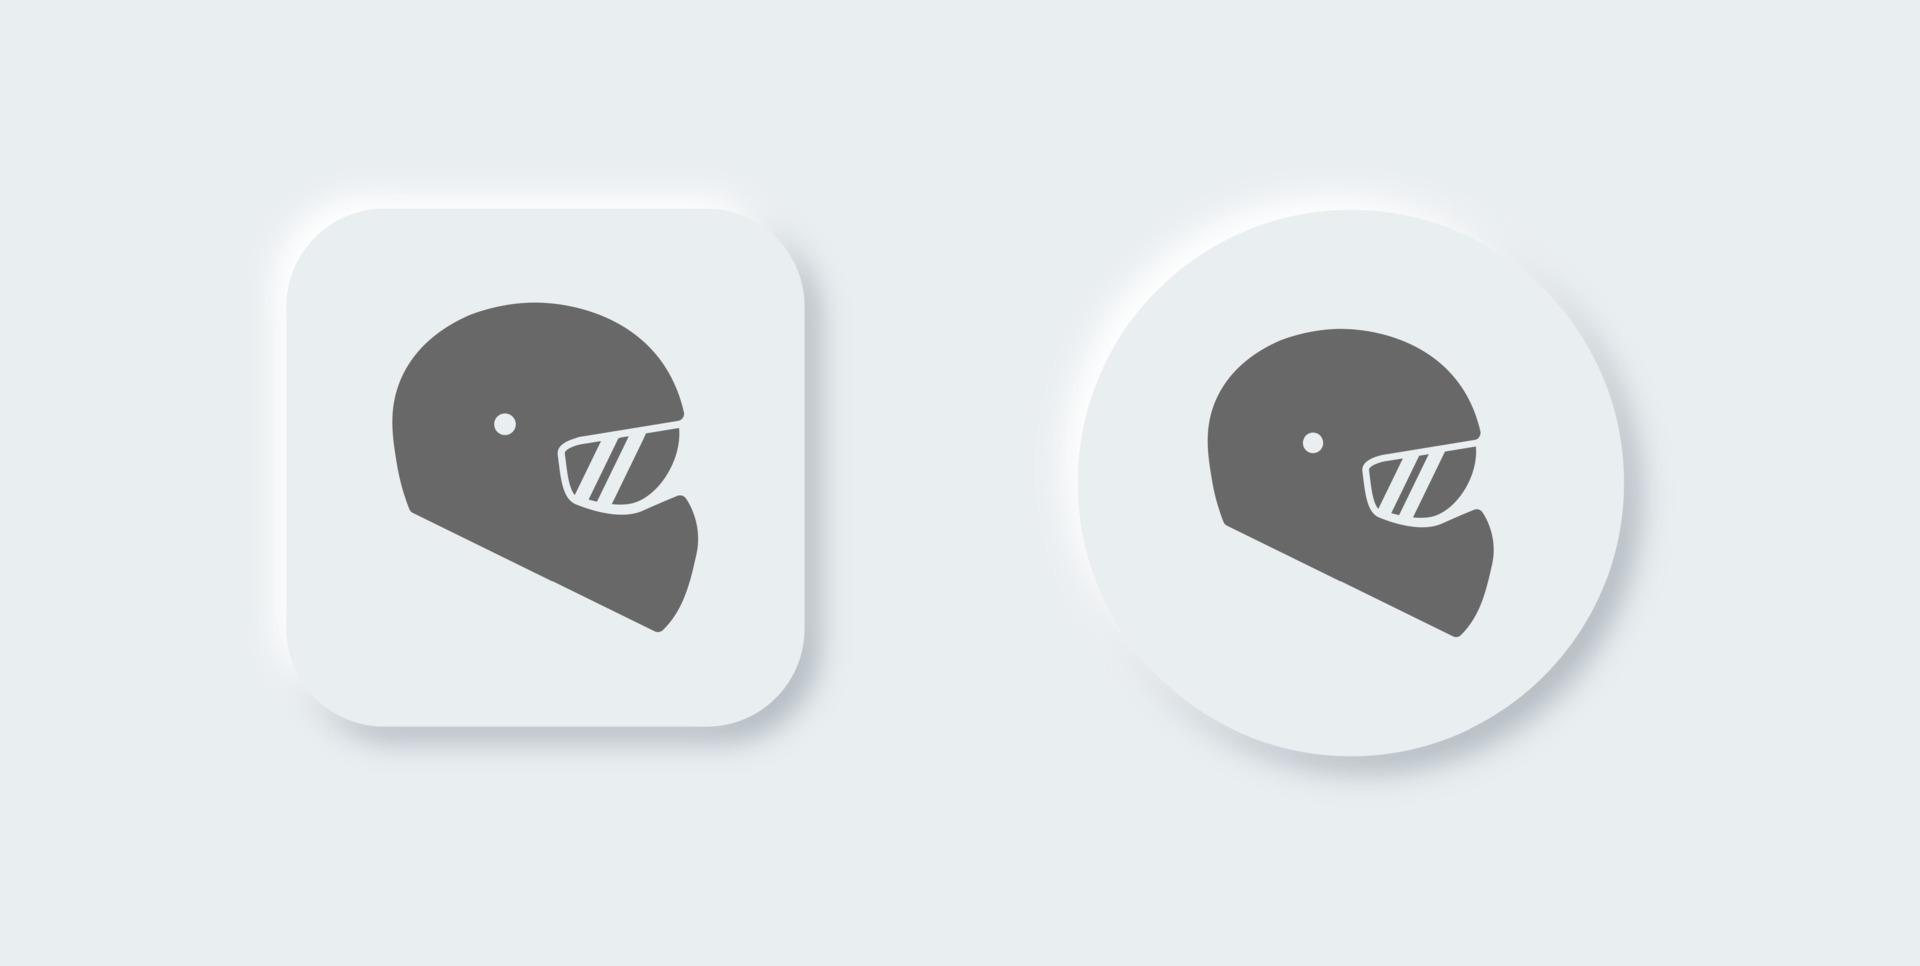 Helmet solid icon in neomorphic design style. Automotive signs vector illustration.